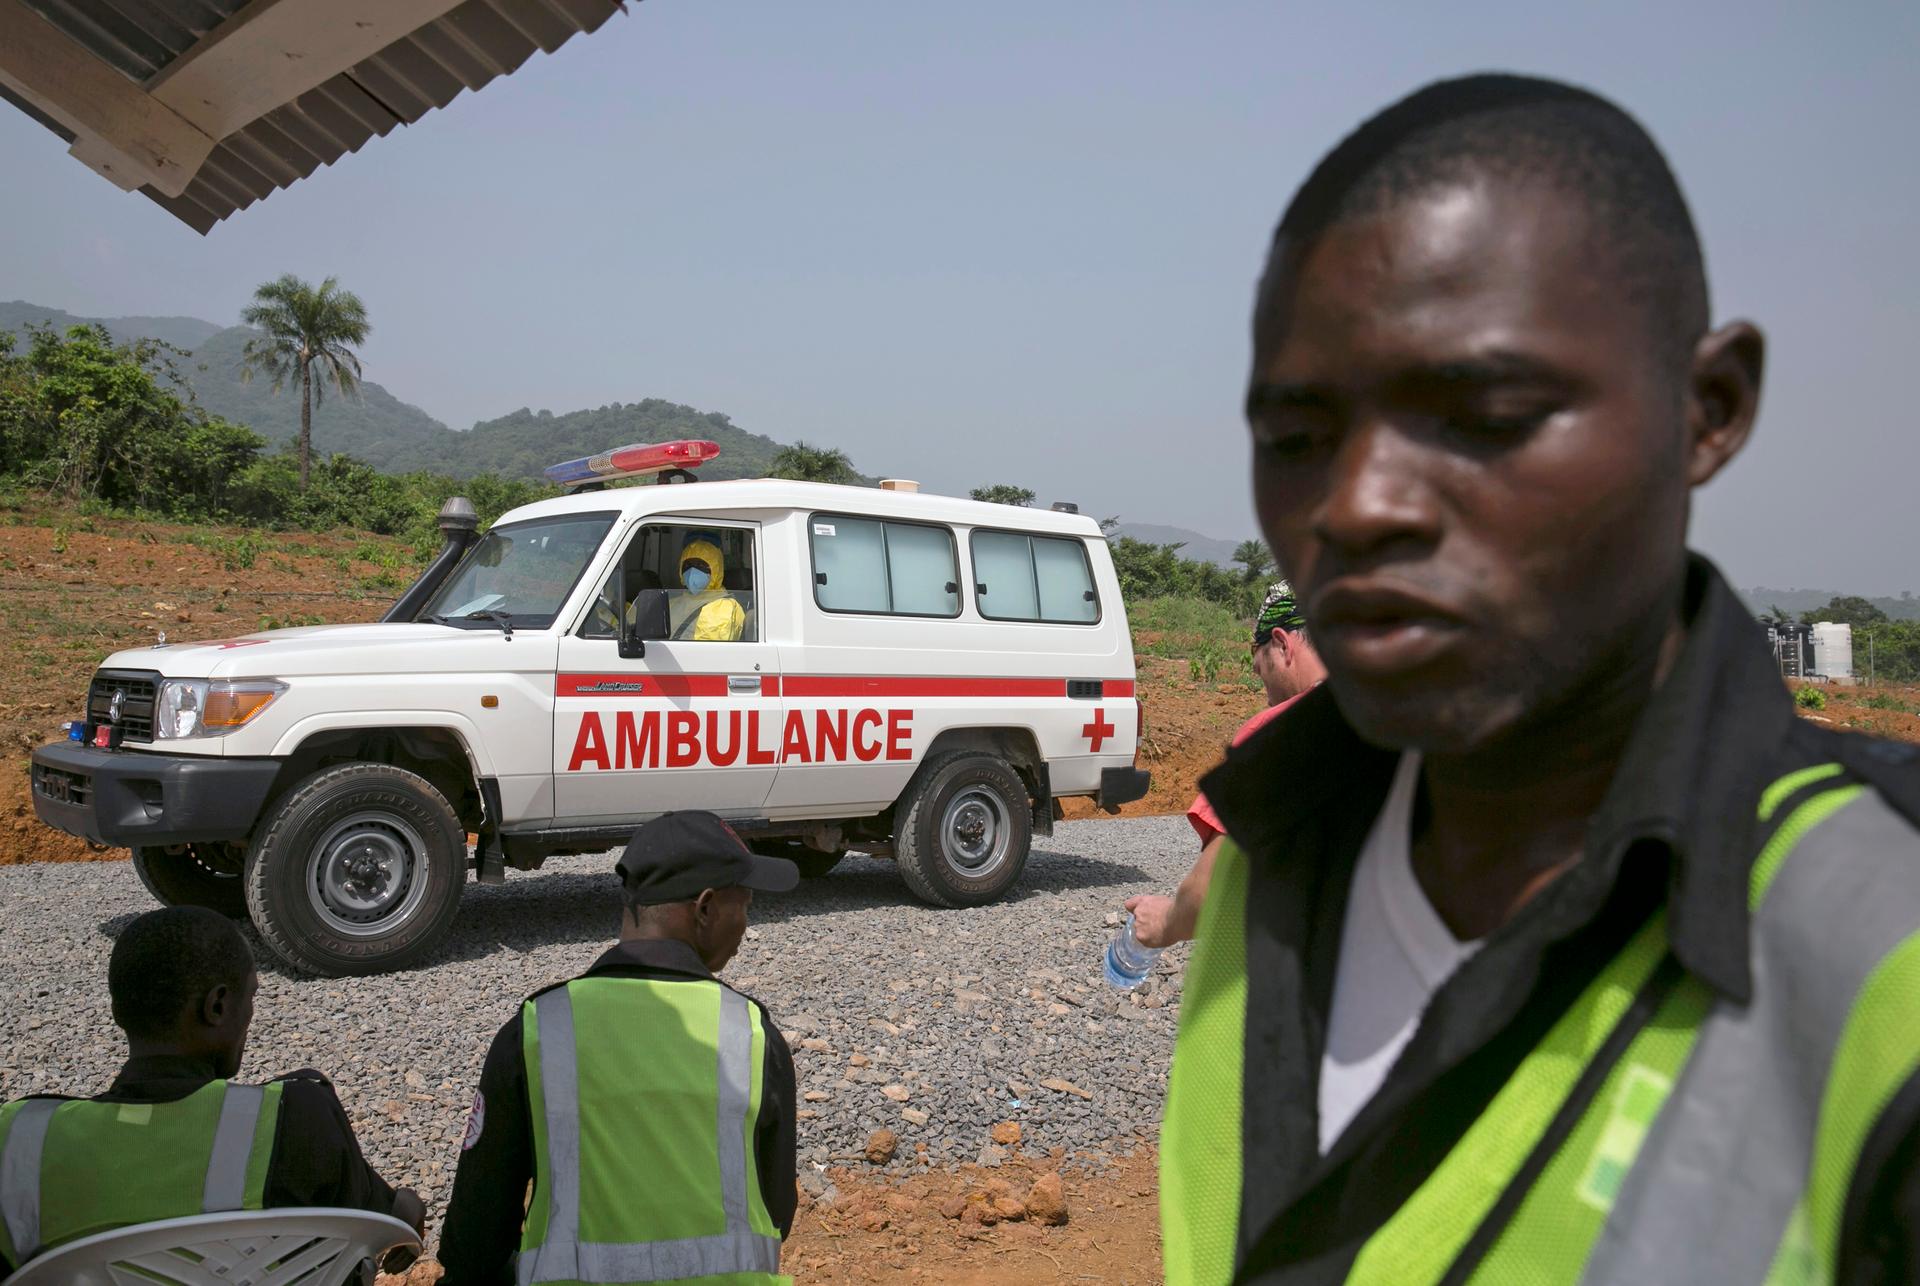 An ambulance transporting an Ebola patient drives to the entrance of a treatment centre outside Freetown, Sierra Leone.